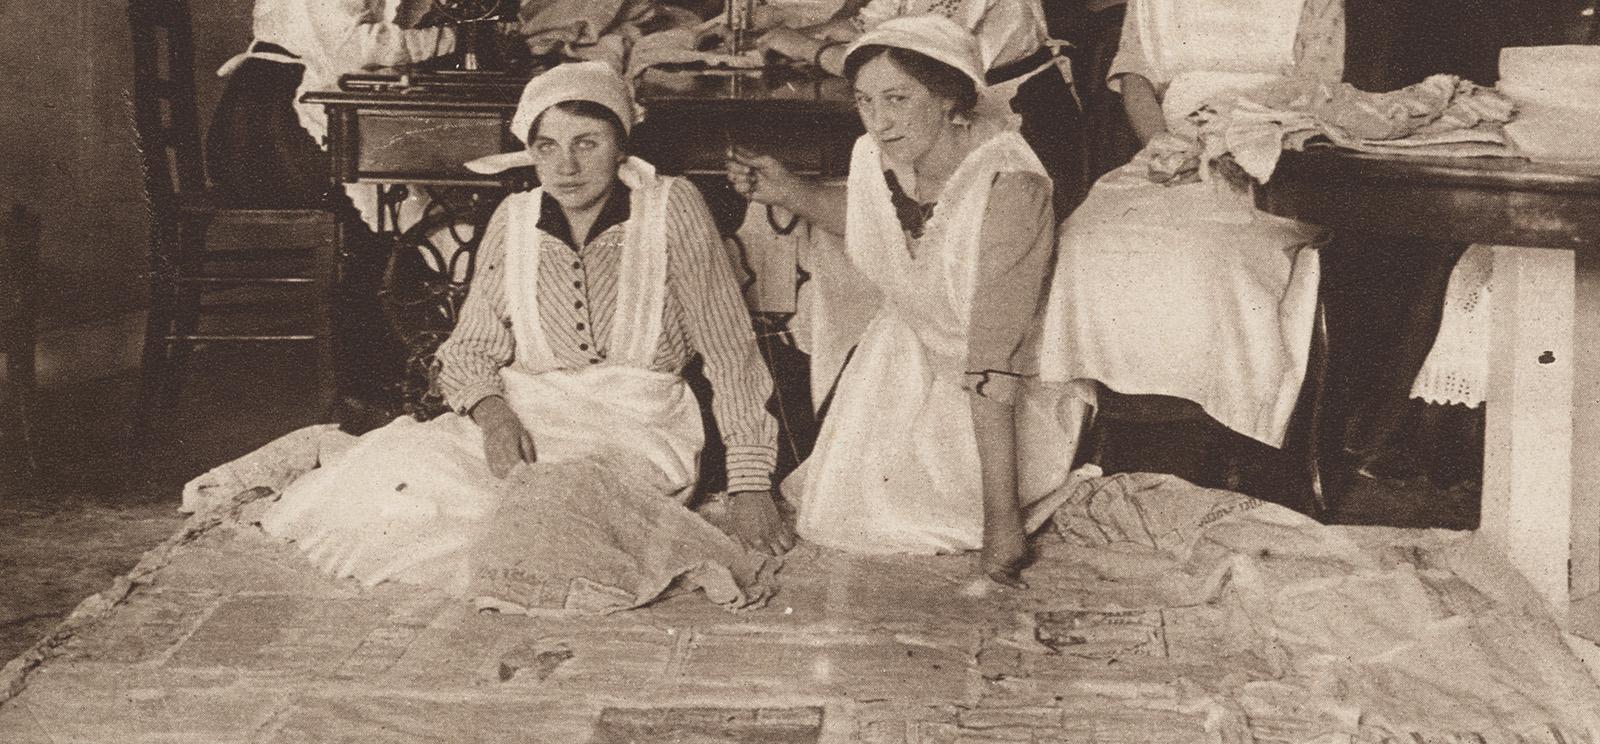 Black and white photograph of two white women in white pinafores kneeling on the ground surrounded by newspapers